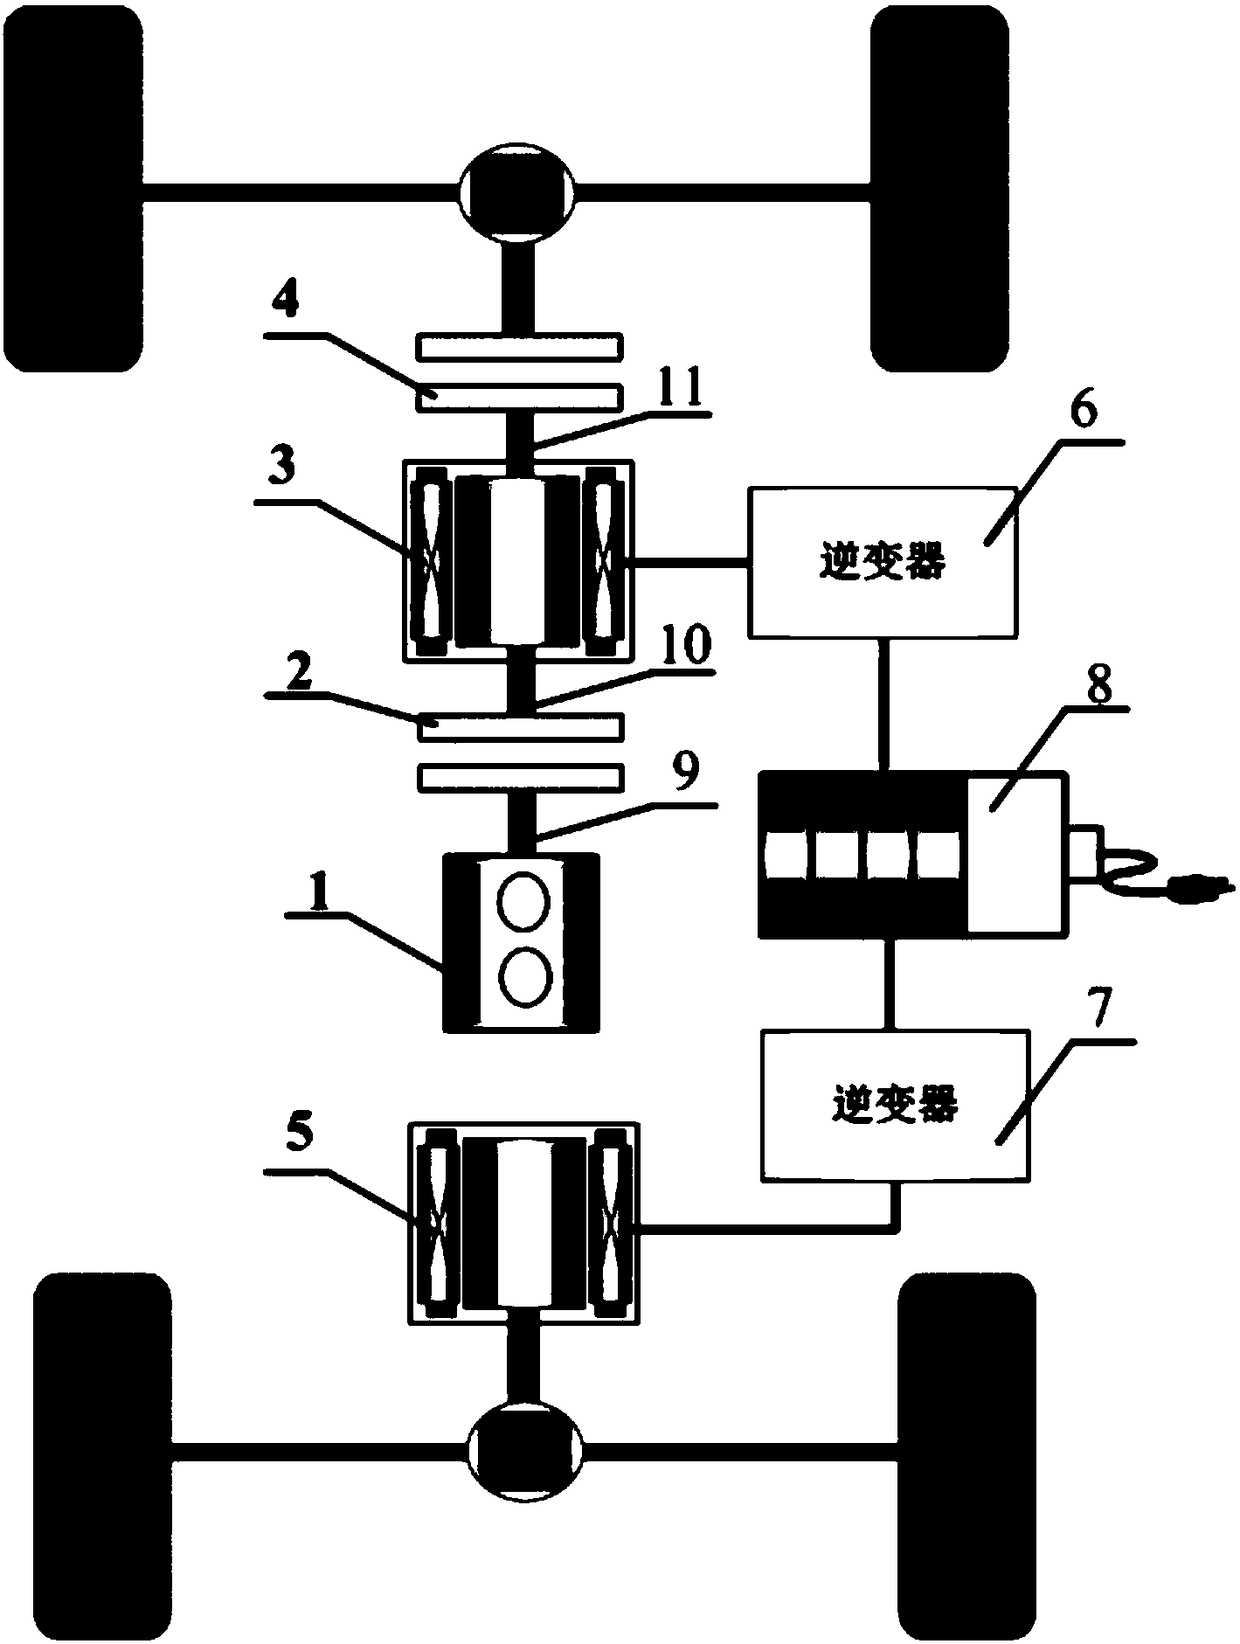 Series extended-range electric vehicle power system and its control method